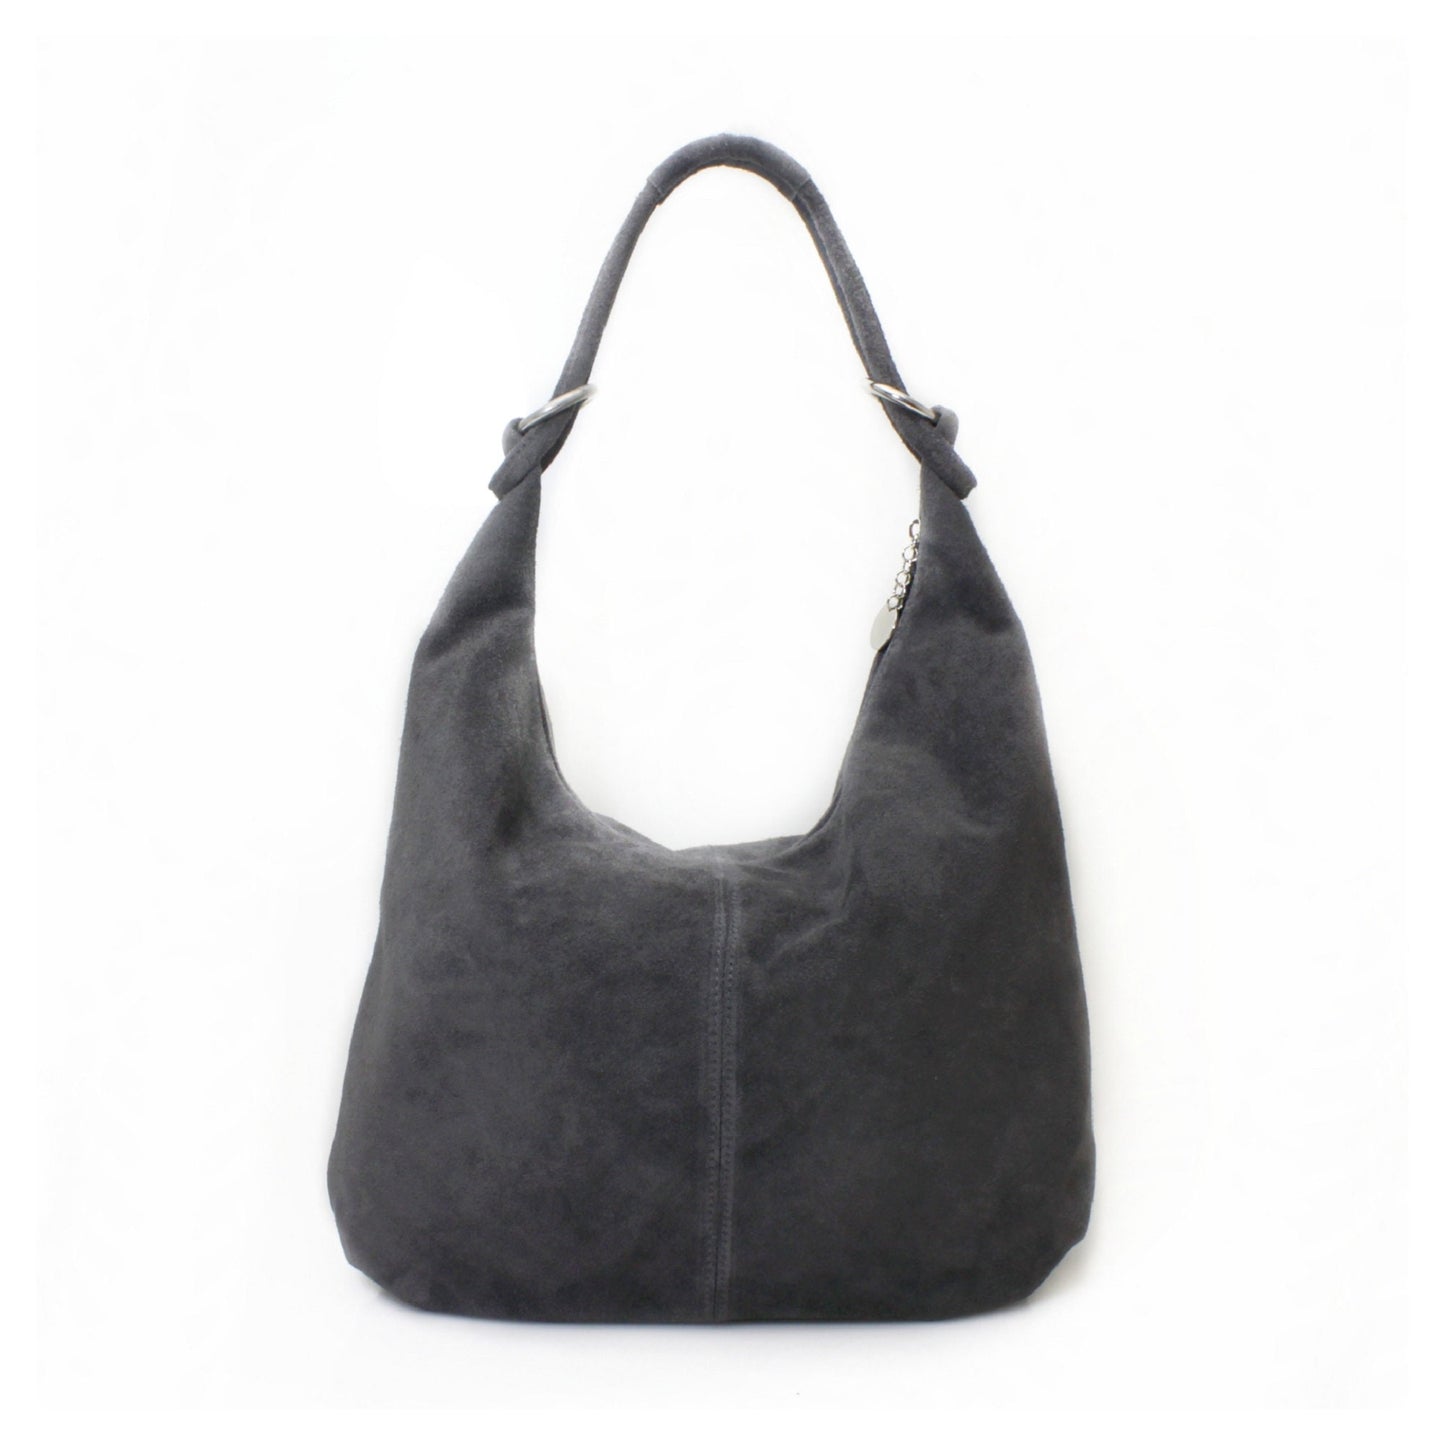 Genuine Suede Leather Large Hobo Shopper